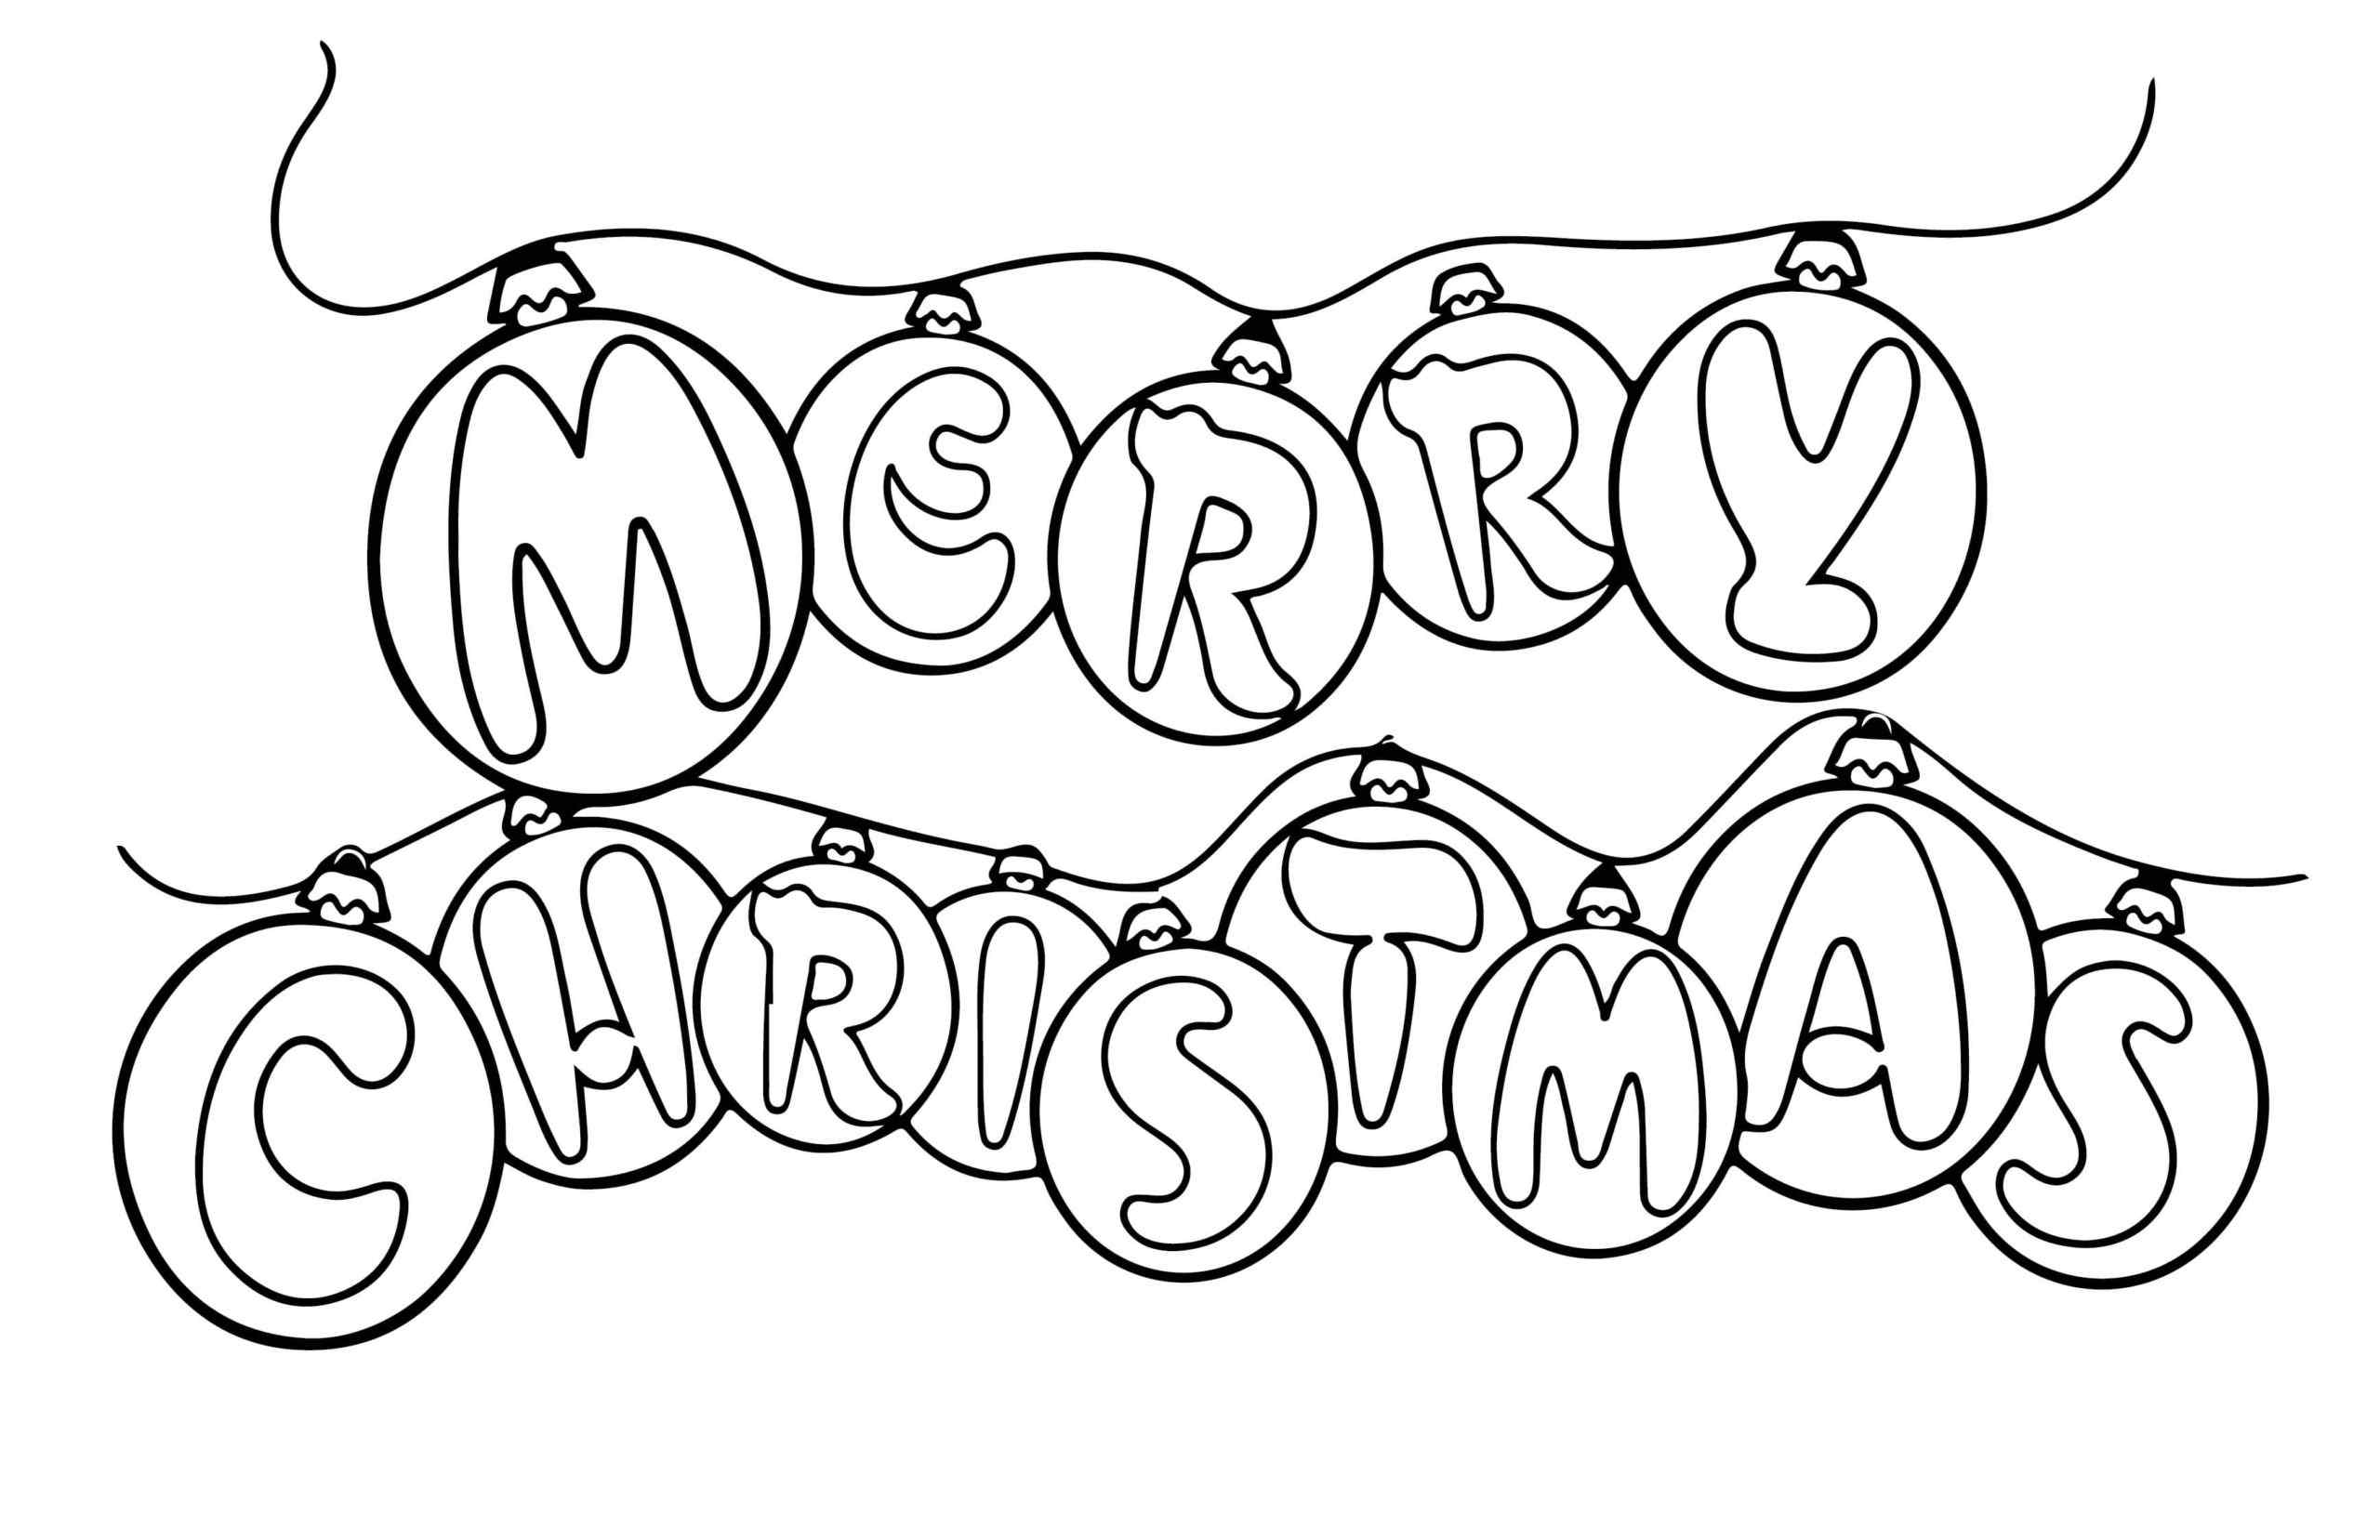 Brighter With A Garland Coloring Page